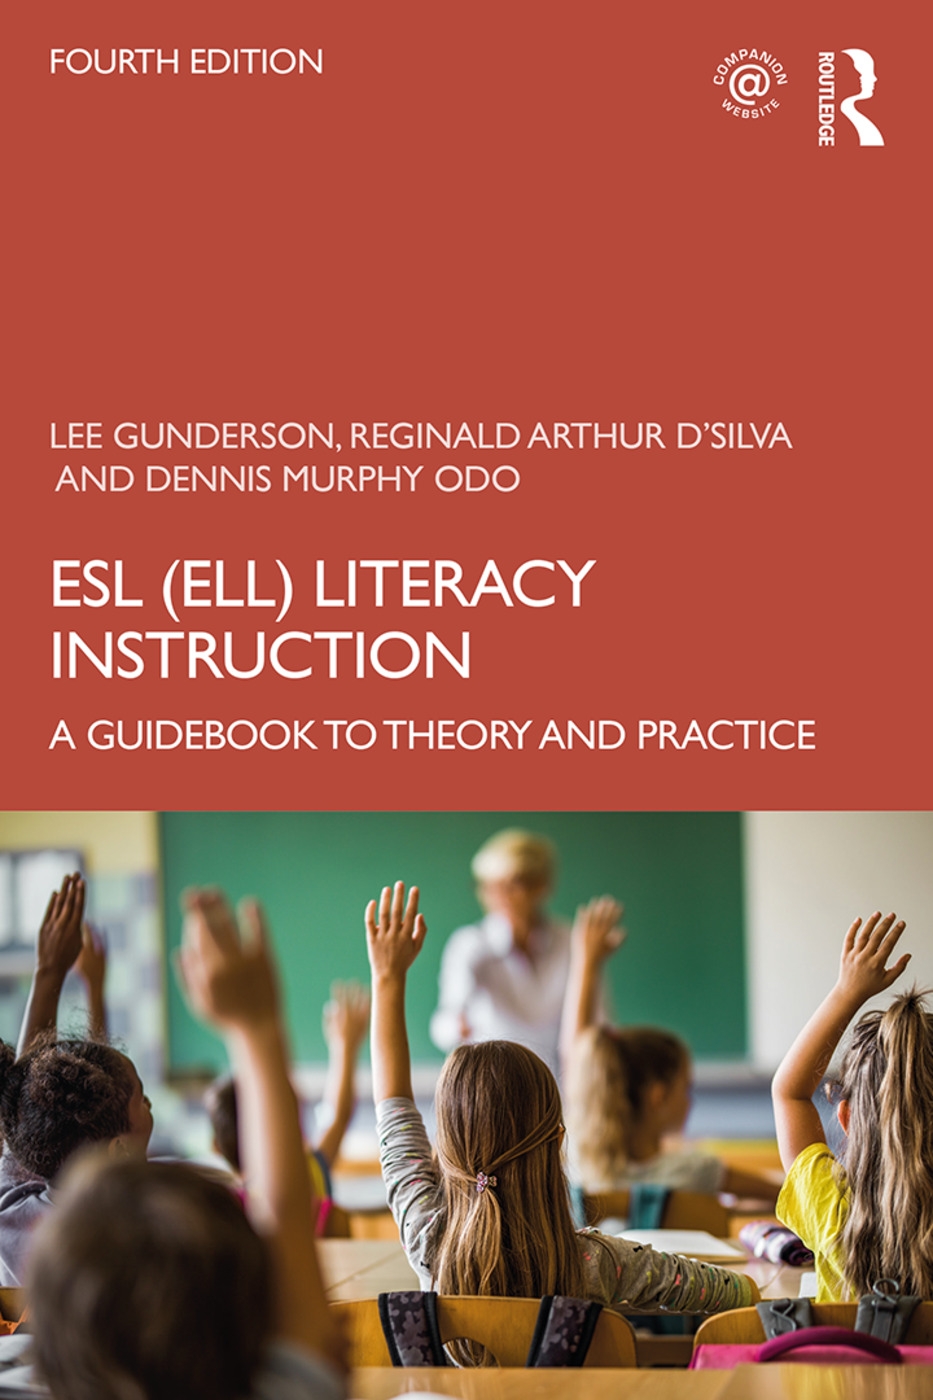 Esl Ell Literacy Instruction: A Guidebook to Theory and Practice